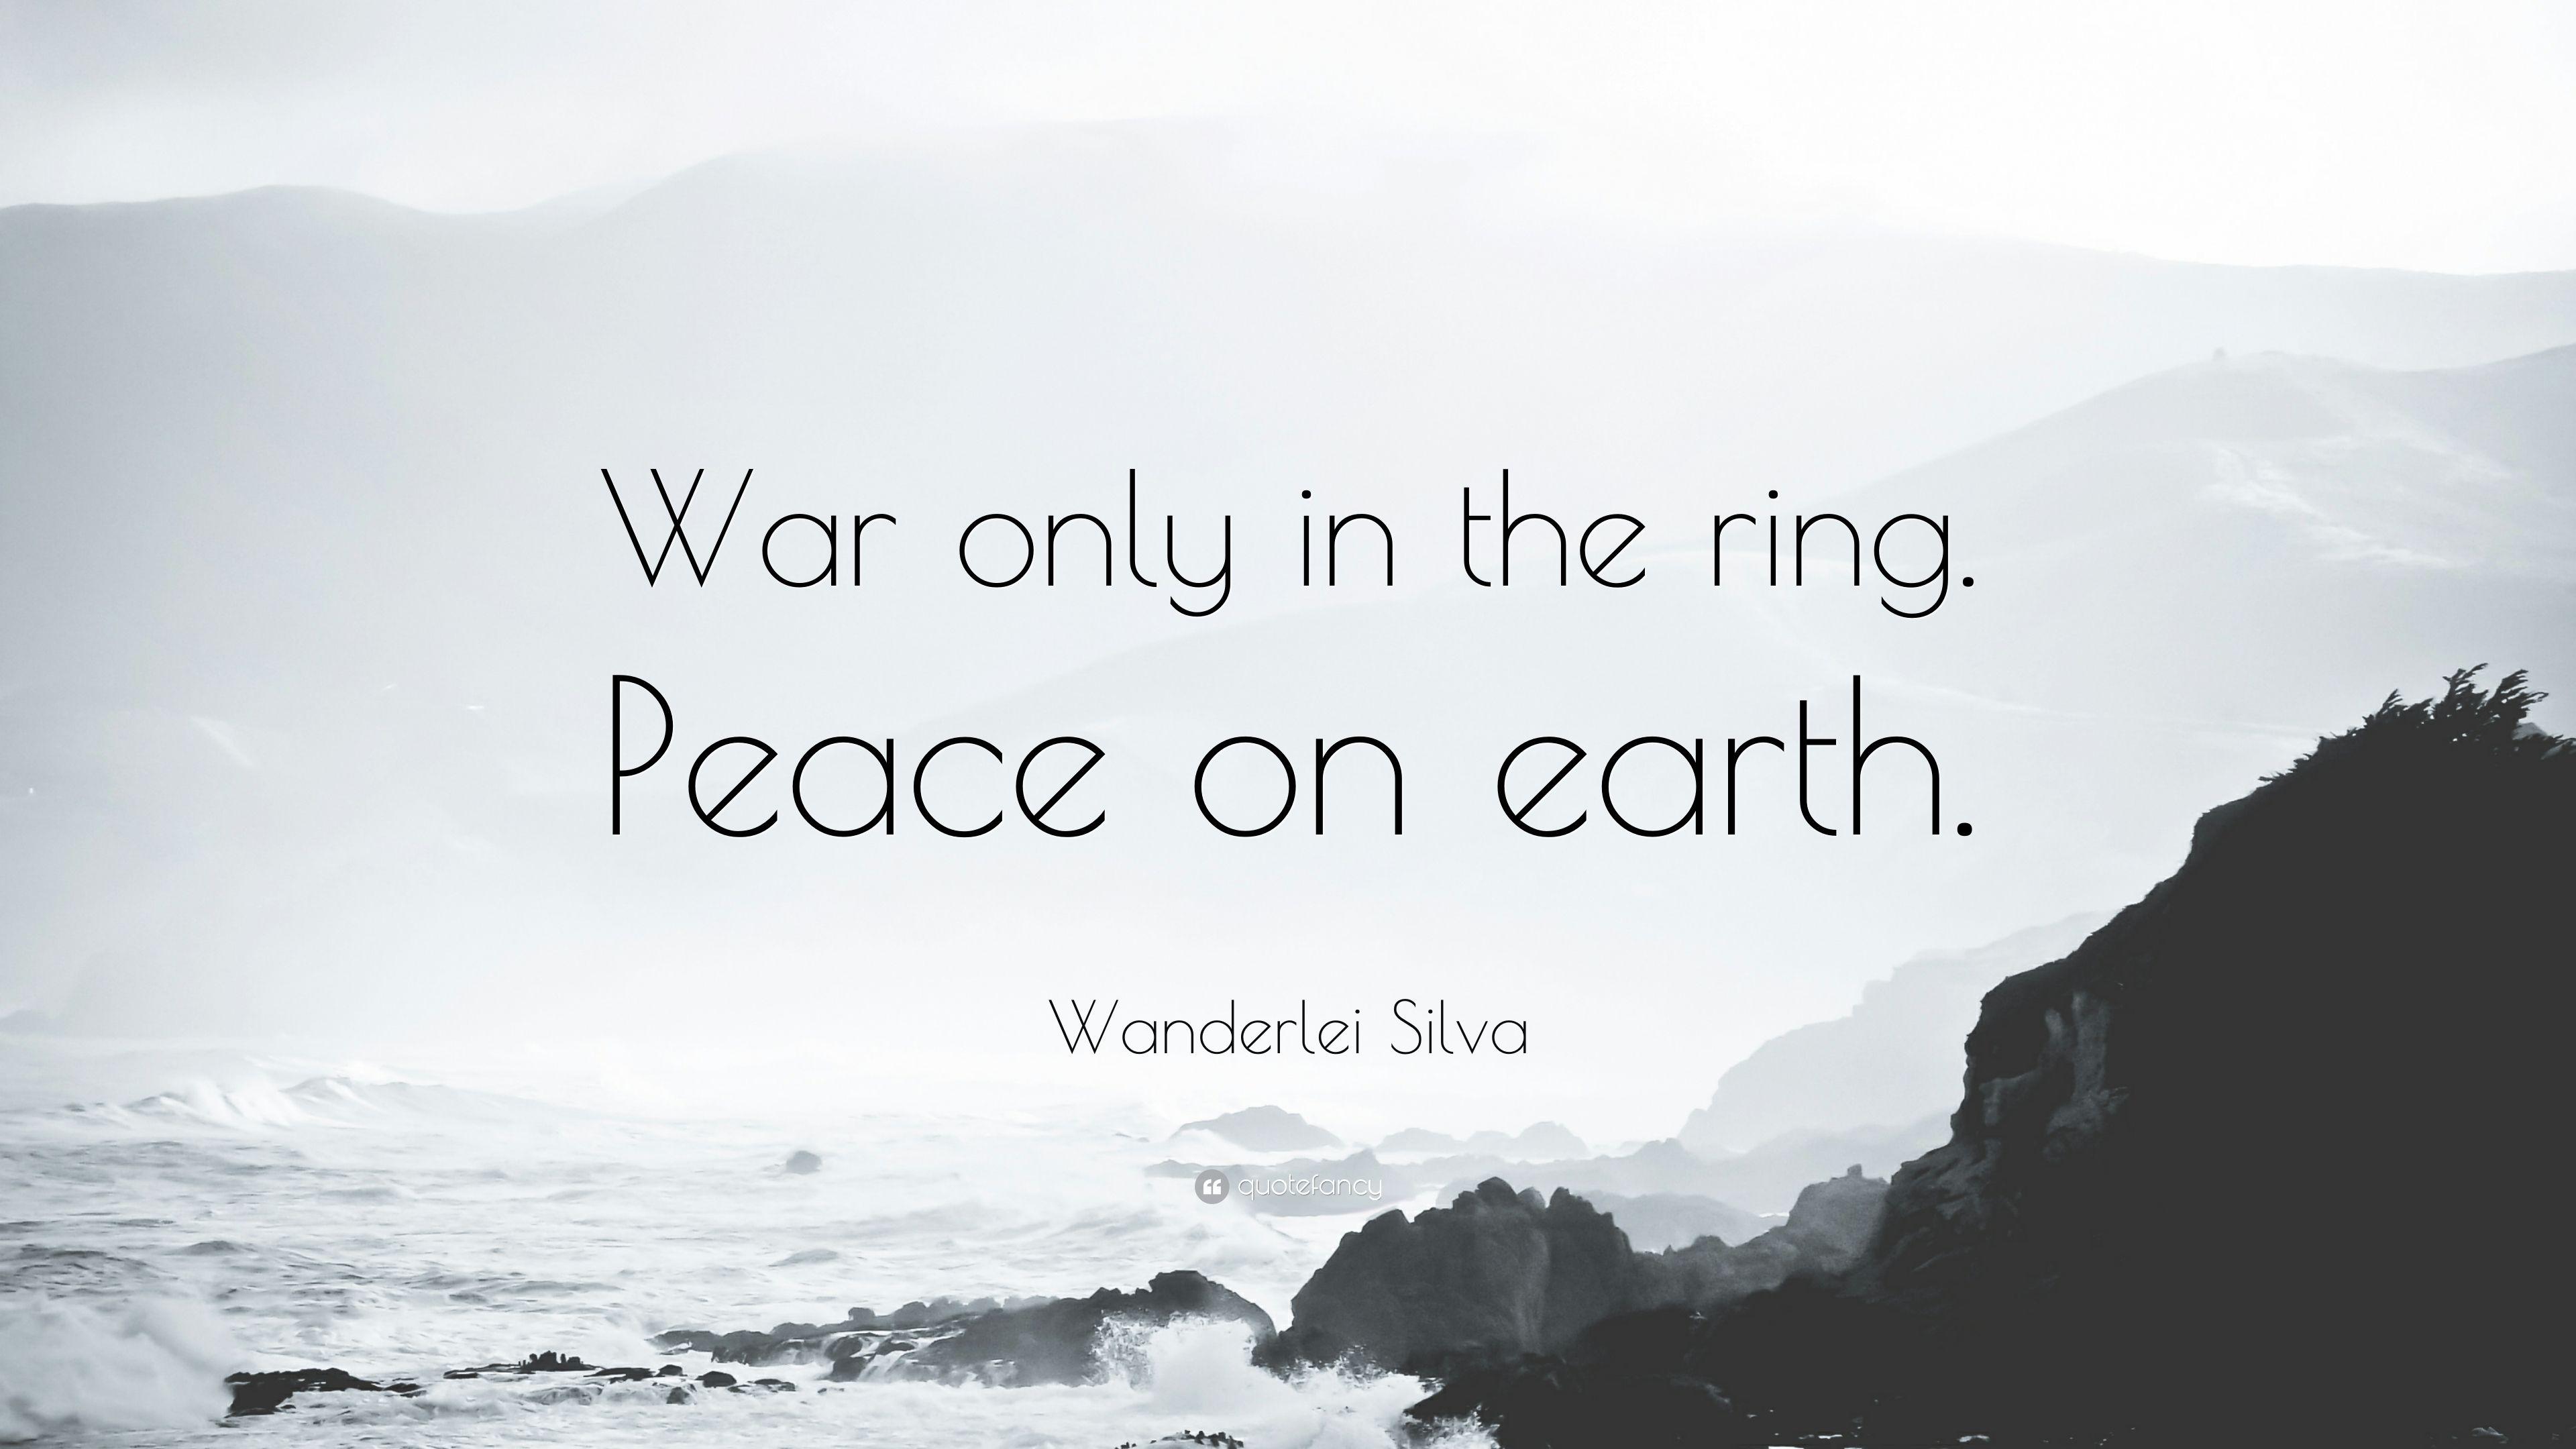 Wanderlei Silva Quote: “War only in the ring. Peace on earth